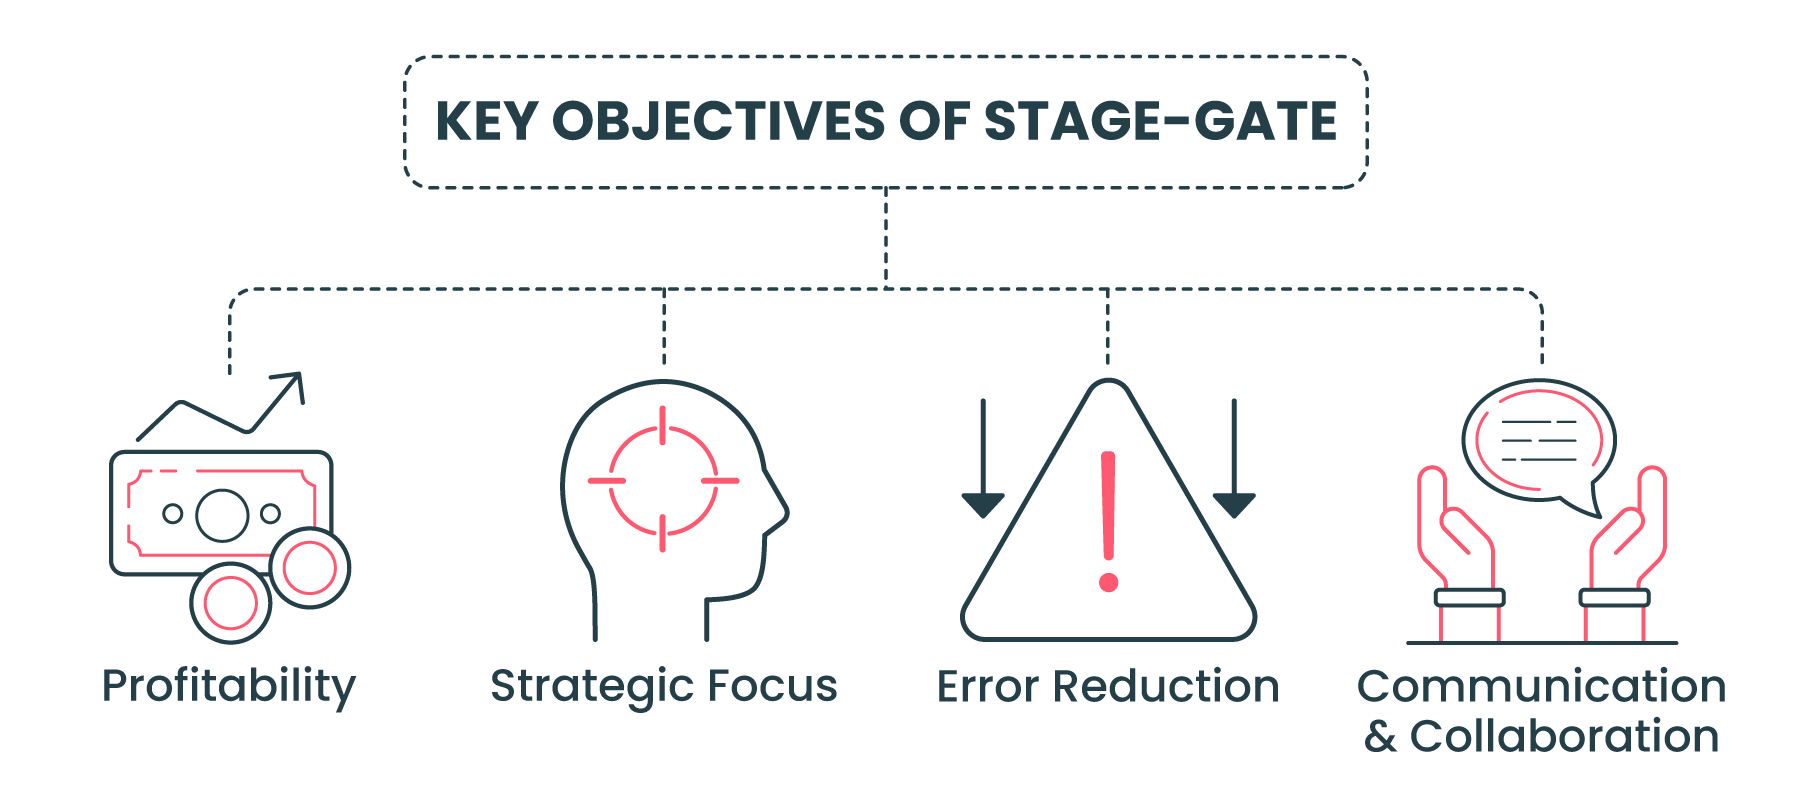 Why Is the Stage-Gate Process Essential?